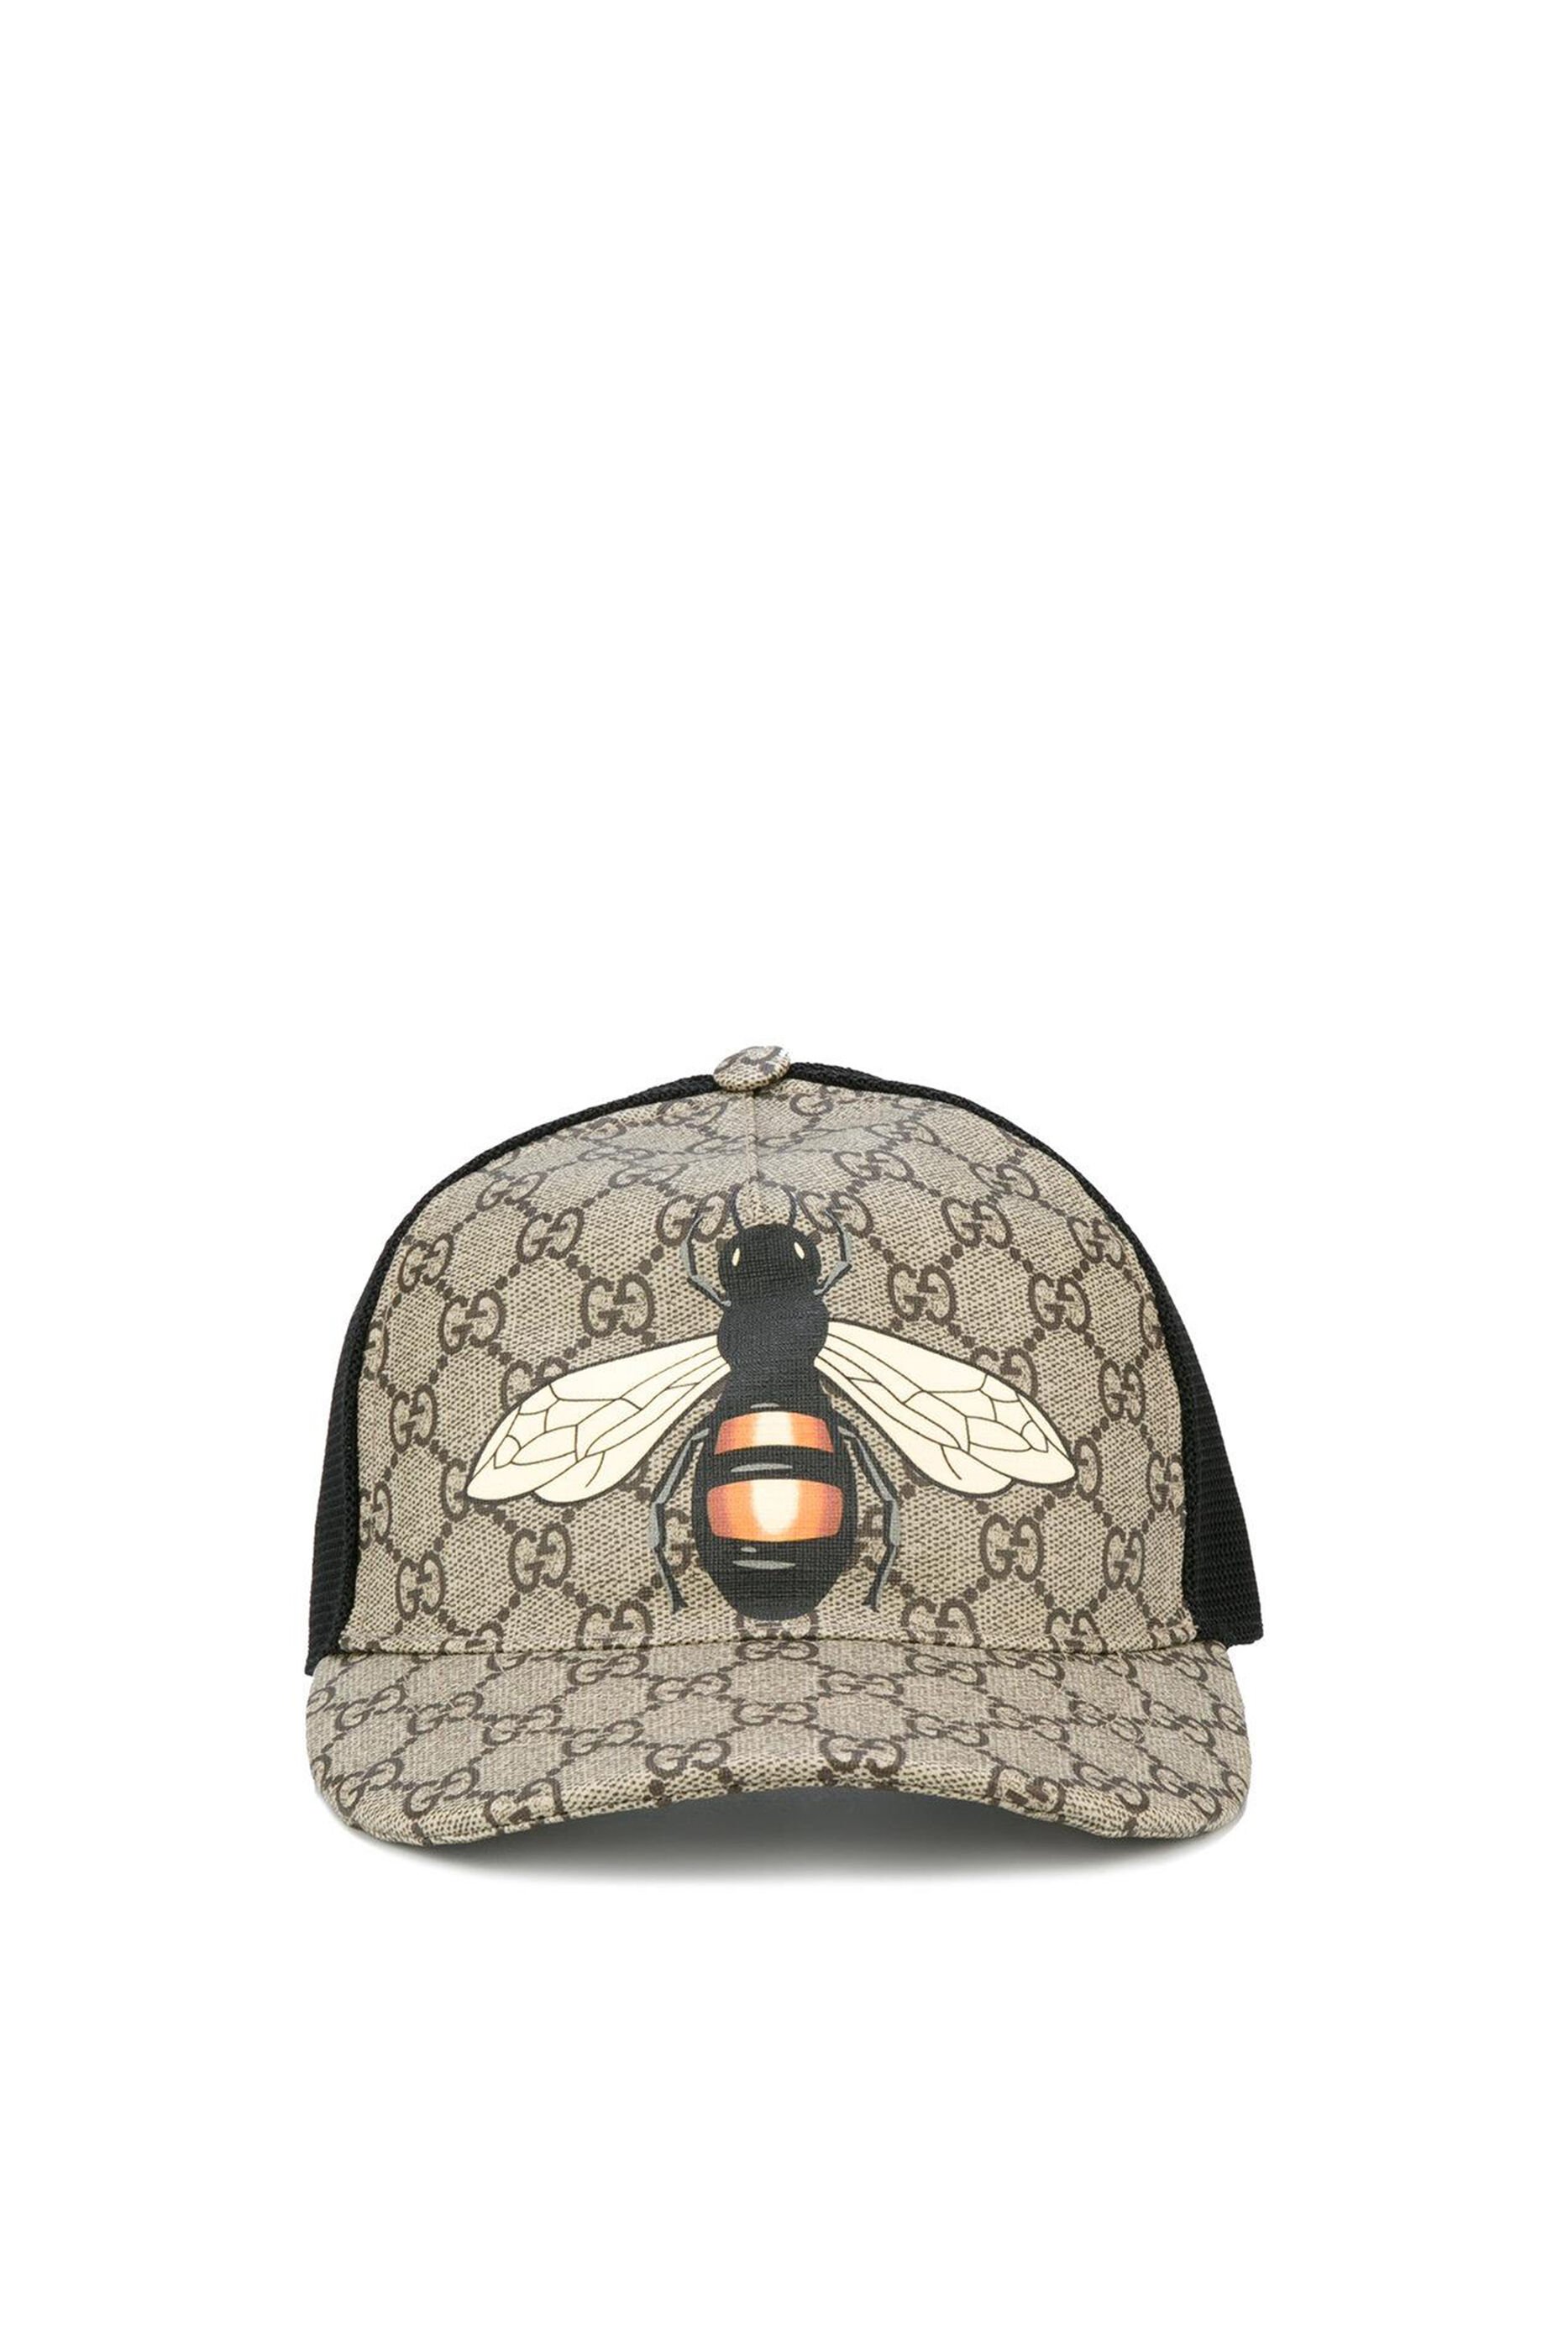 gucci hat bee